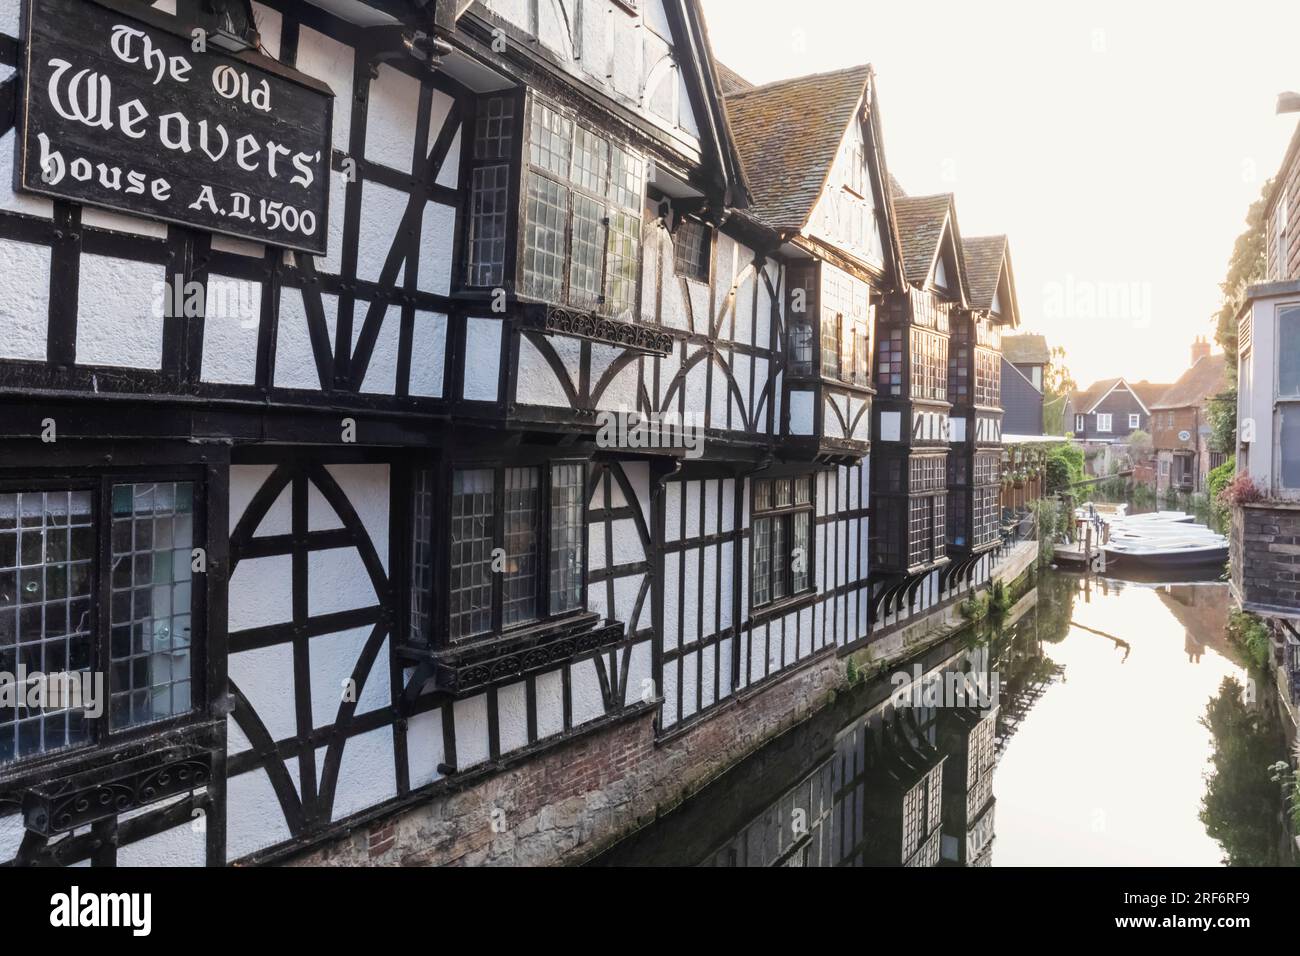 England, Kent, Canterbury, The Old Weavers House and The Great Stour River Stock Photo